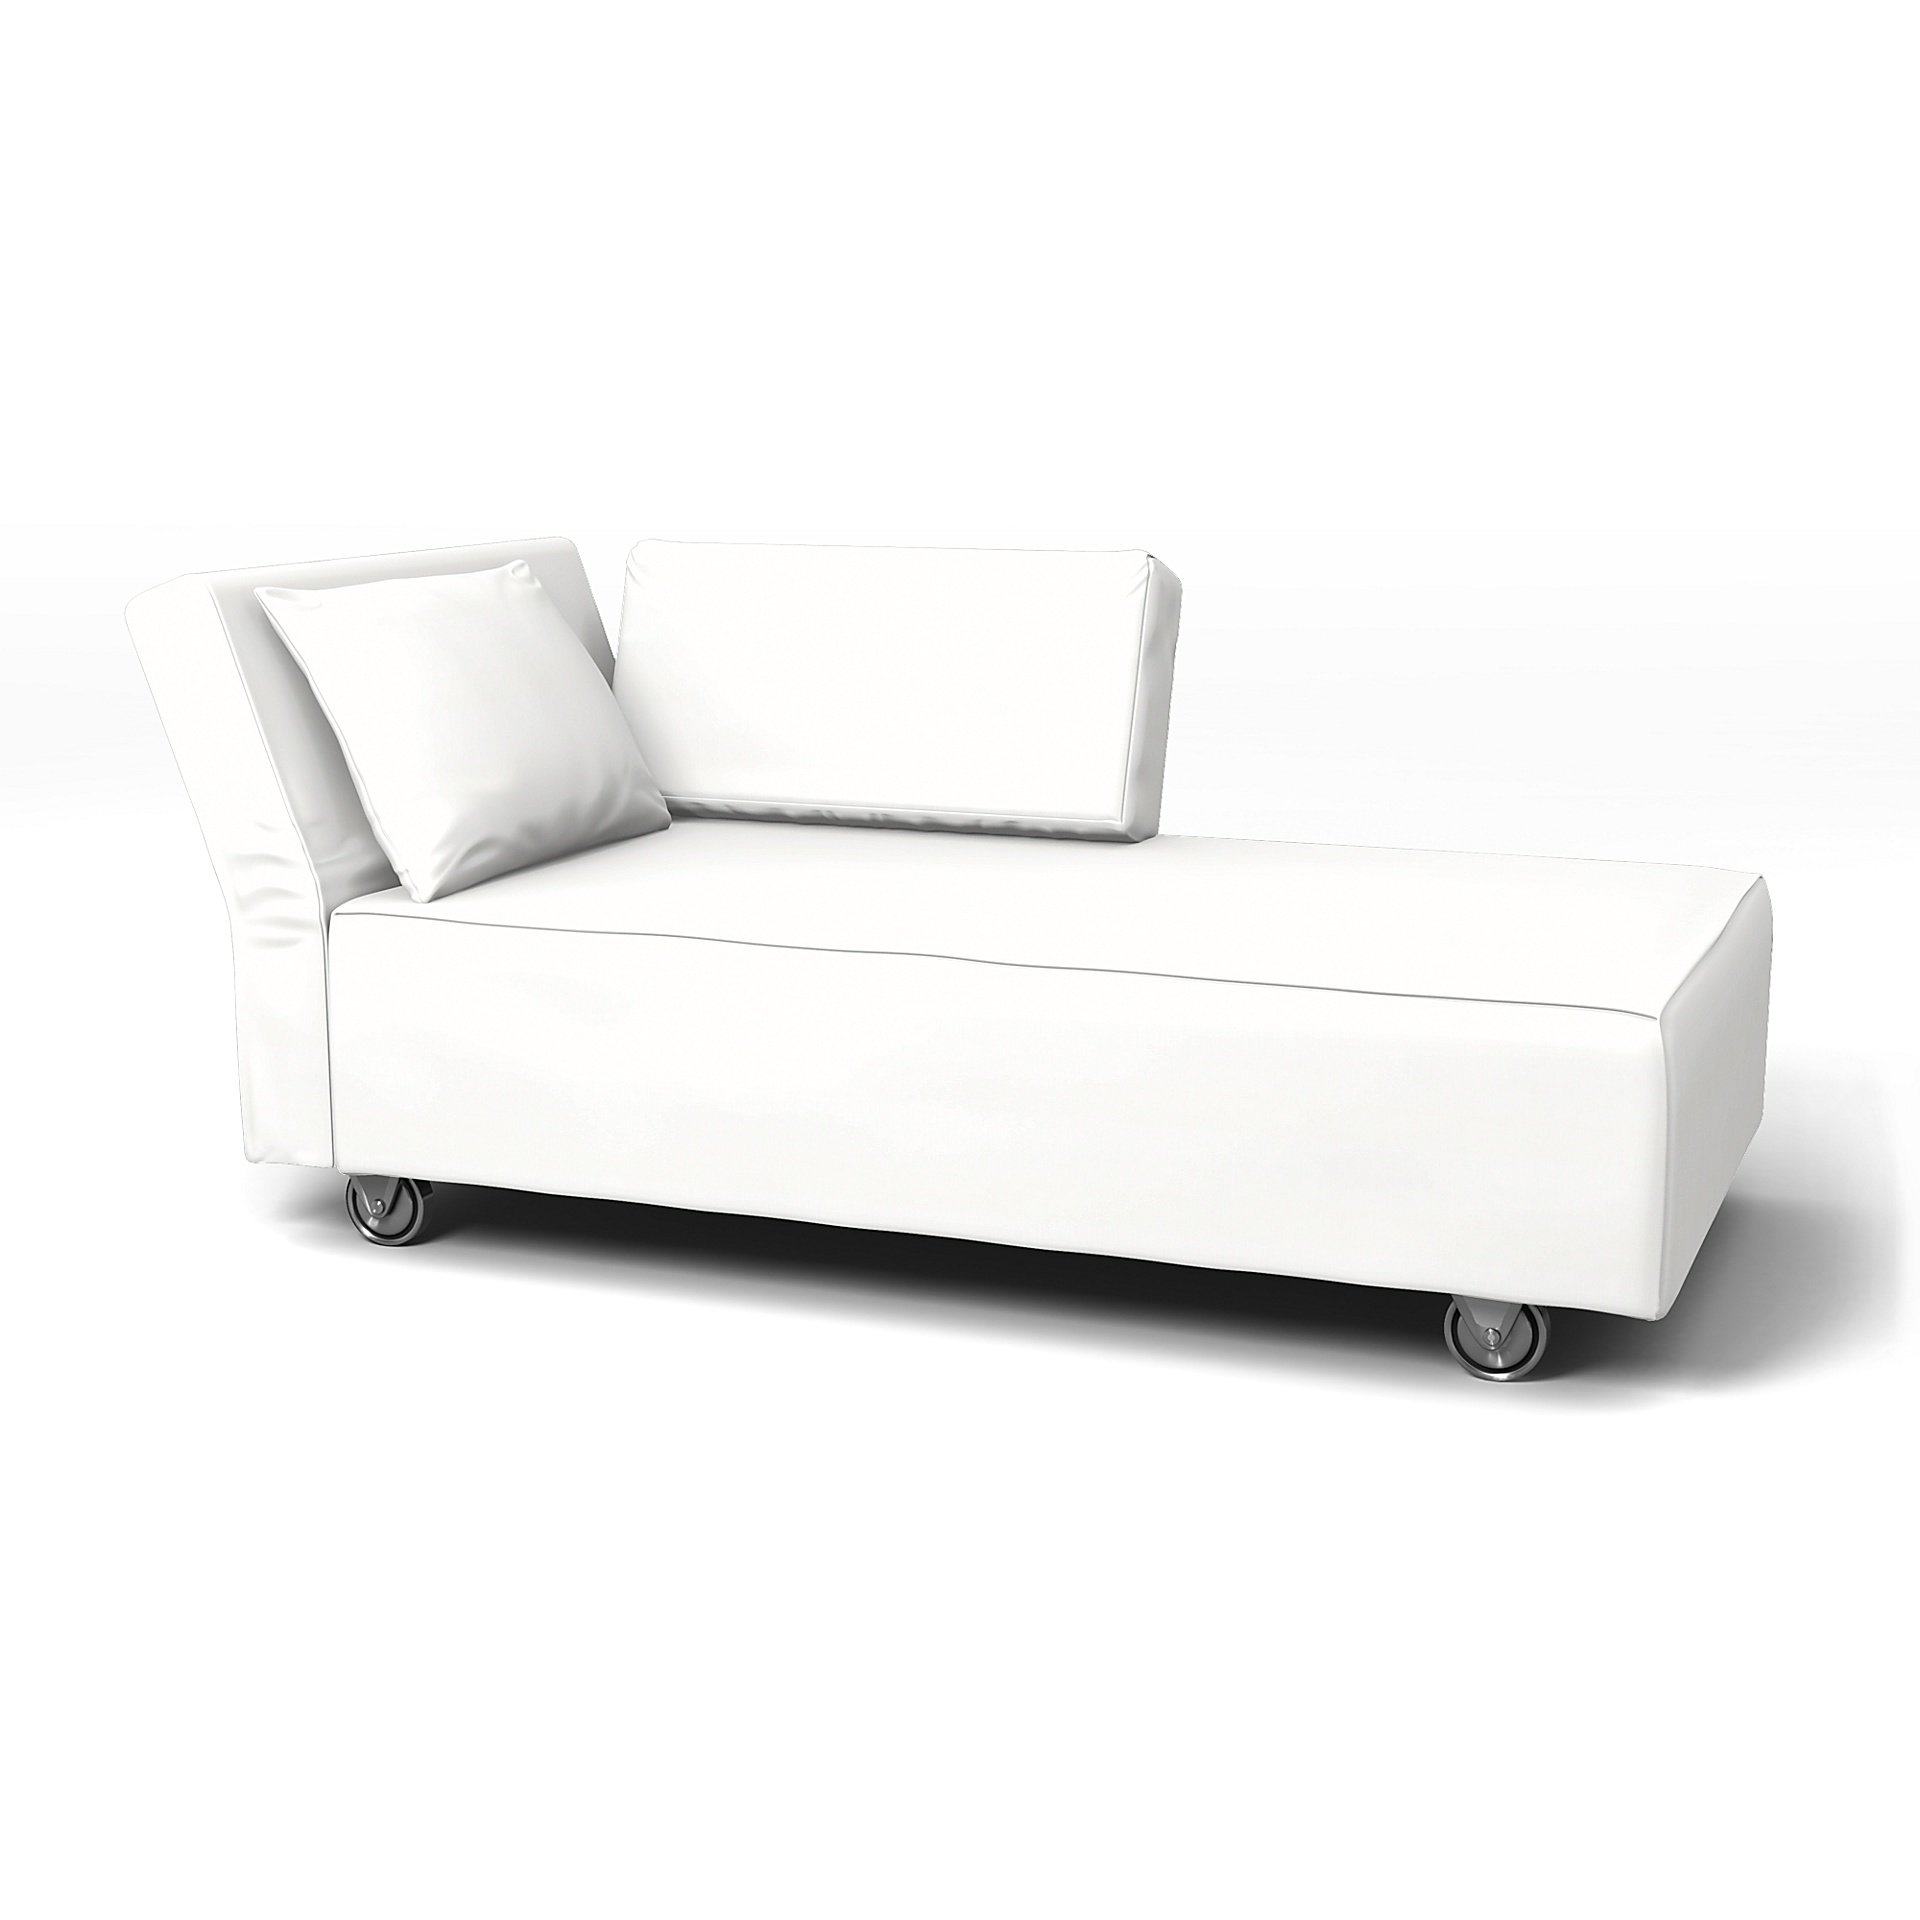 IKEA - Falsterbo Chaise with Left Armrest Cover, Absolute White, Linen - Bemz